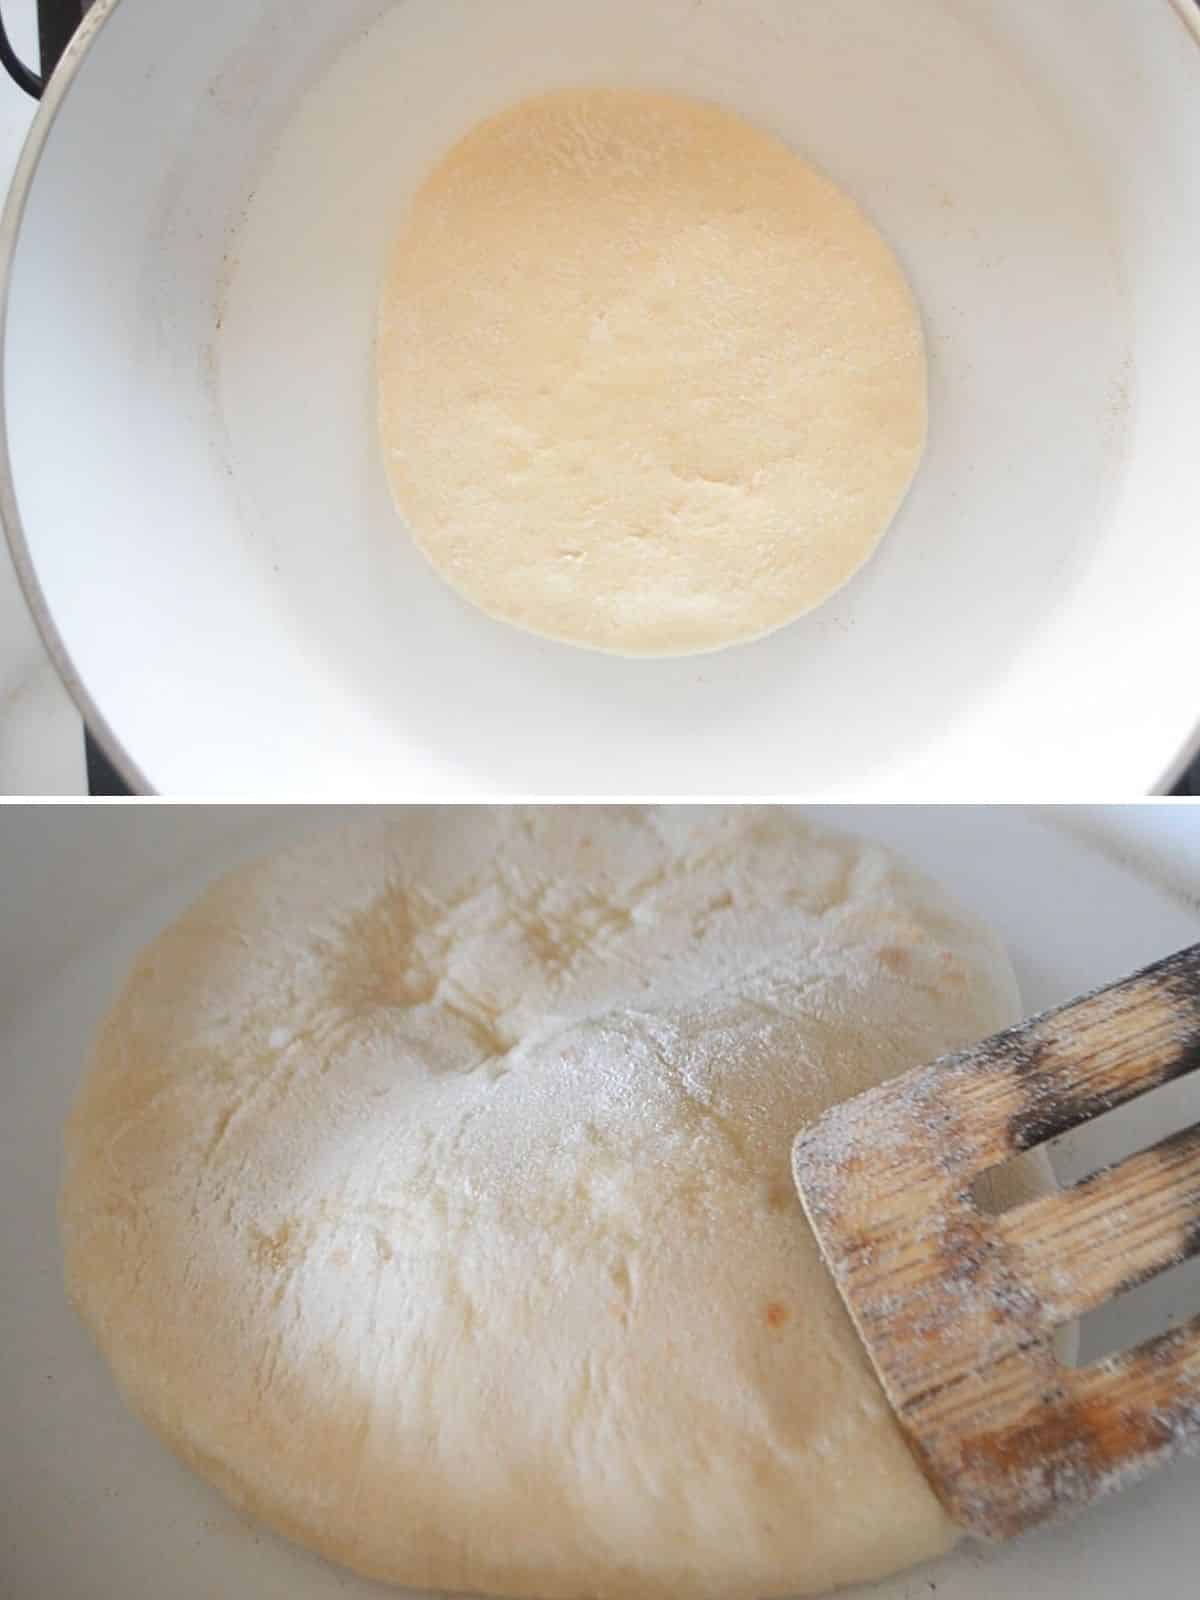 A collage of two images showing how to cook pita bread on a skillet.